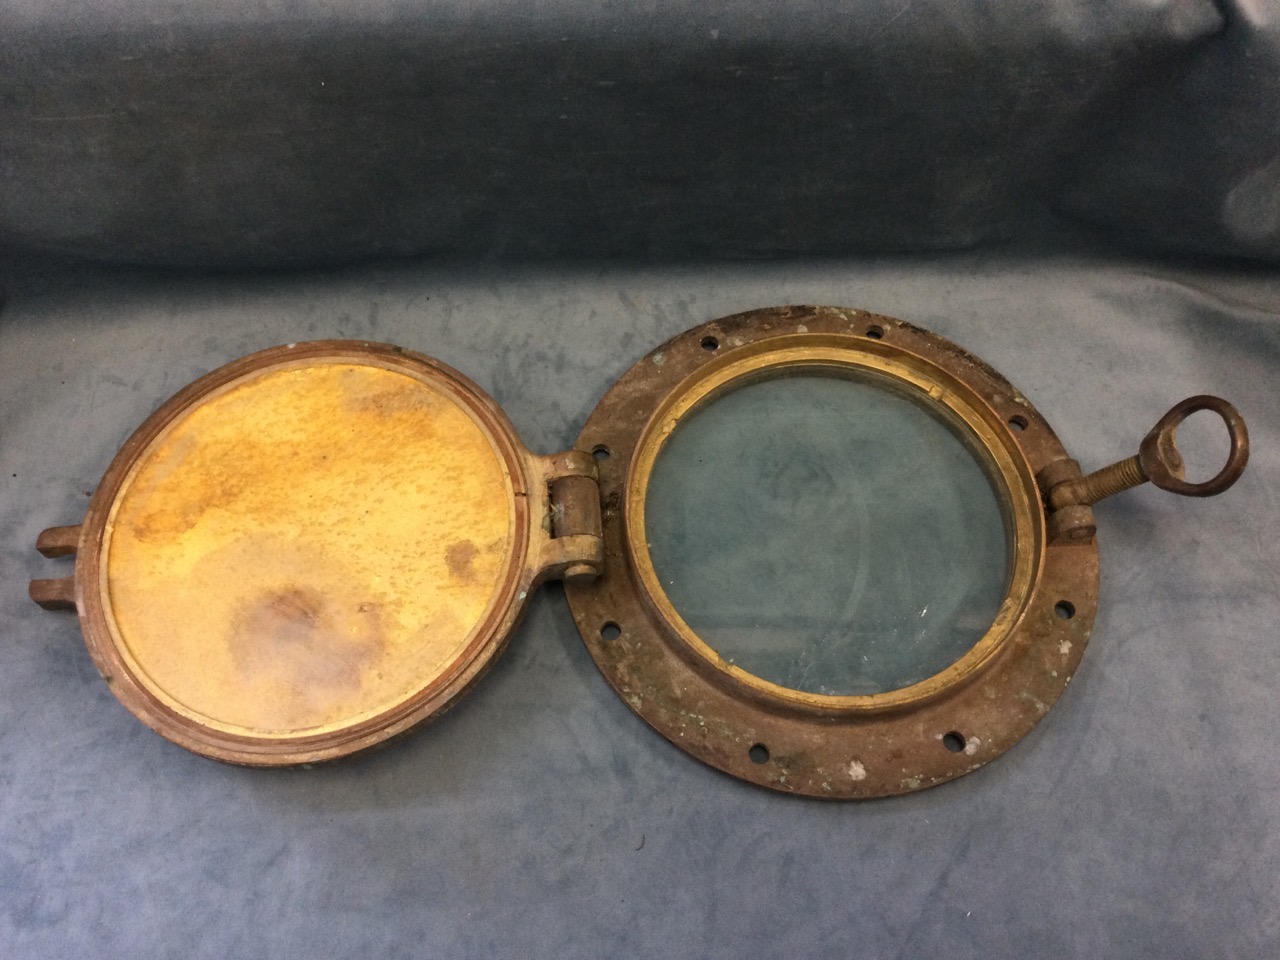 A heavy bronze ships porthole with intact lense, having hinged cover and screw closure, salvaged